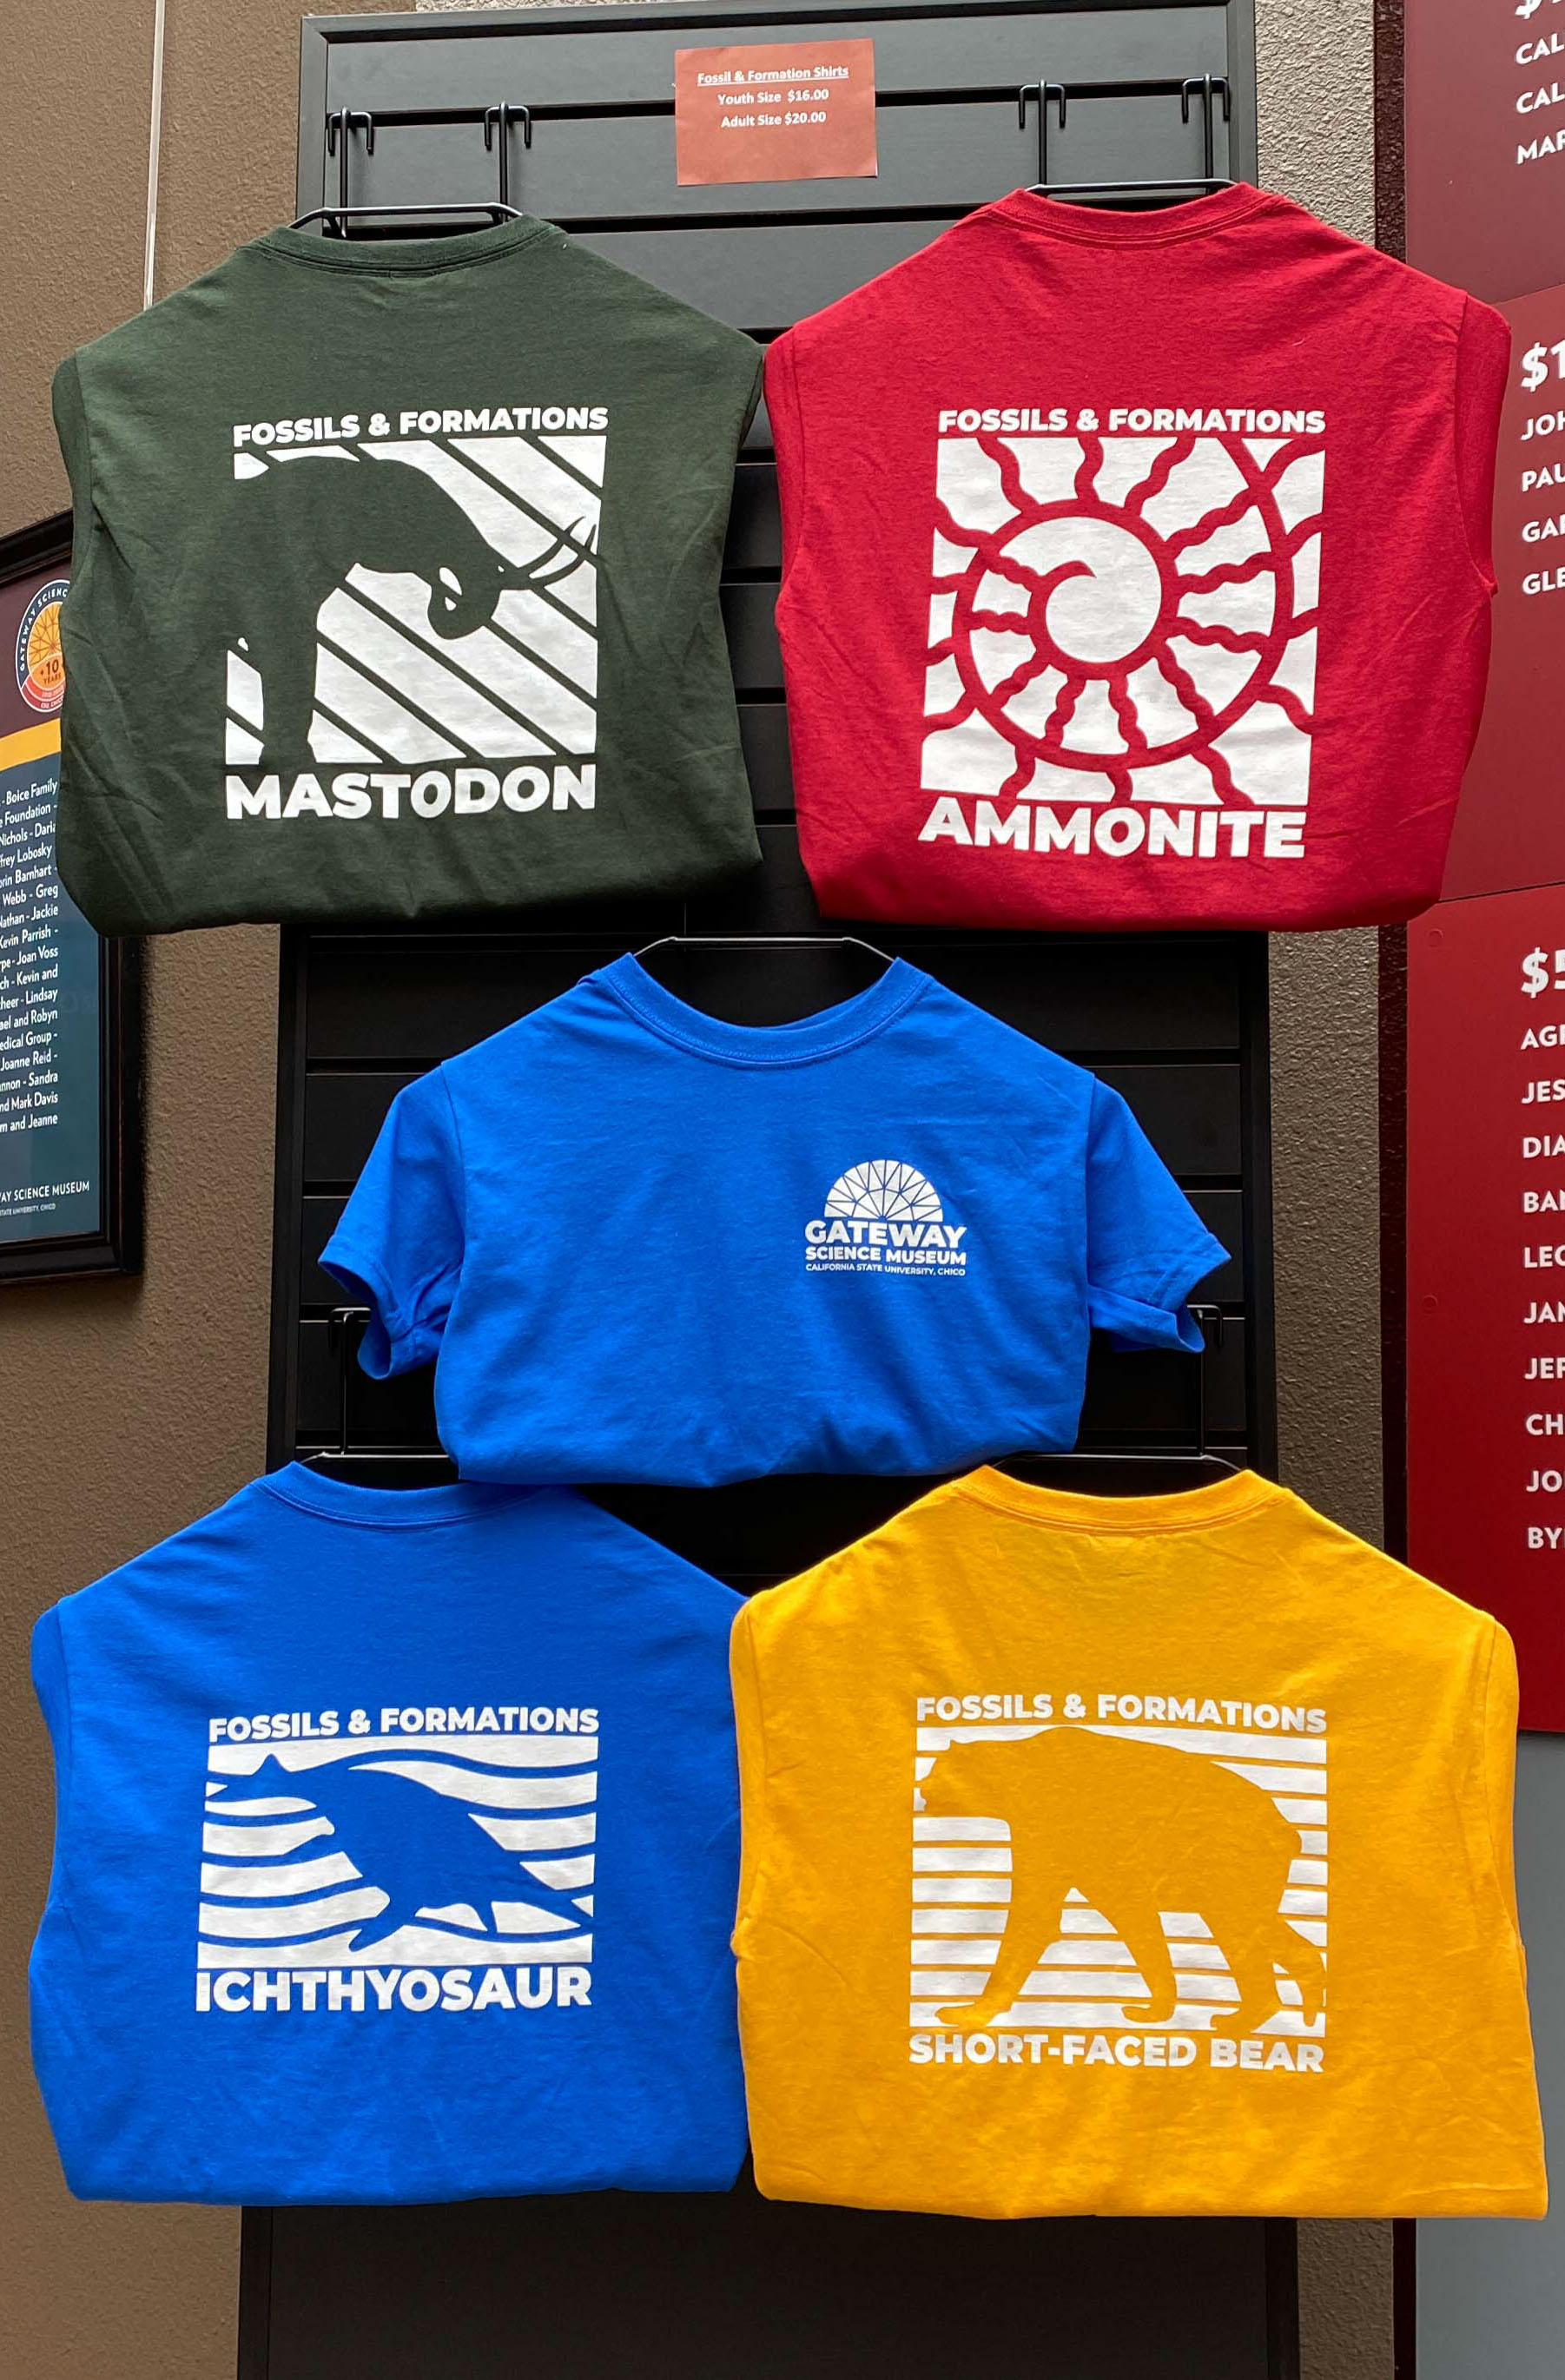 fossils and formations shirts on display in the museum